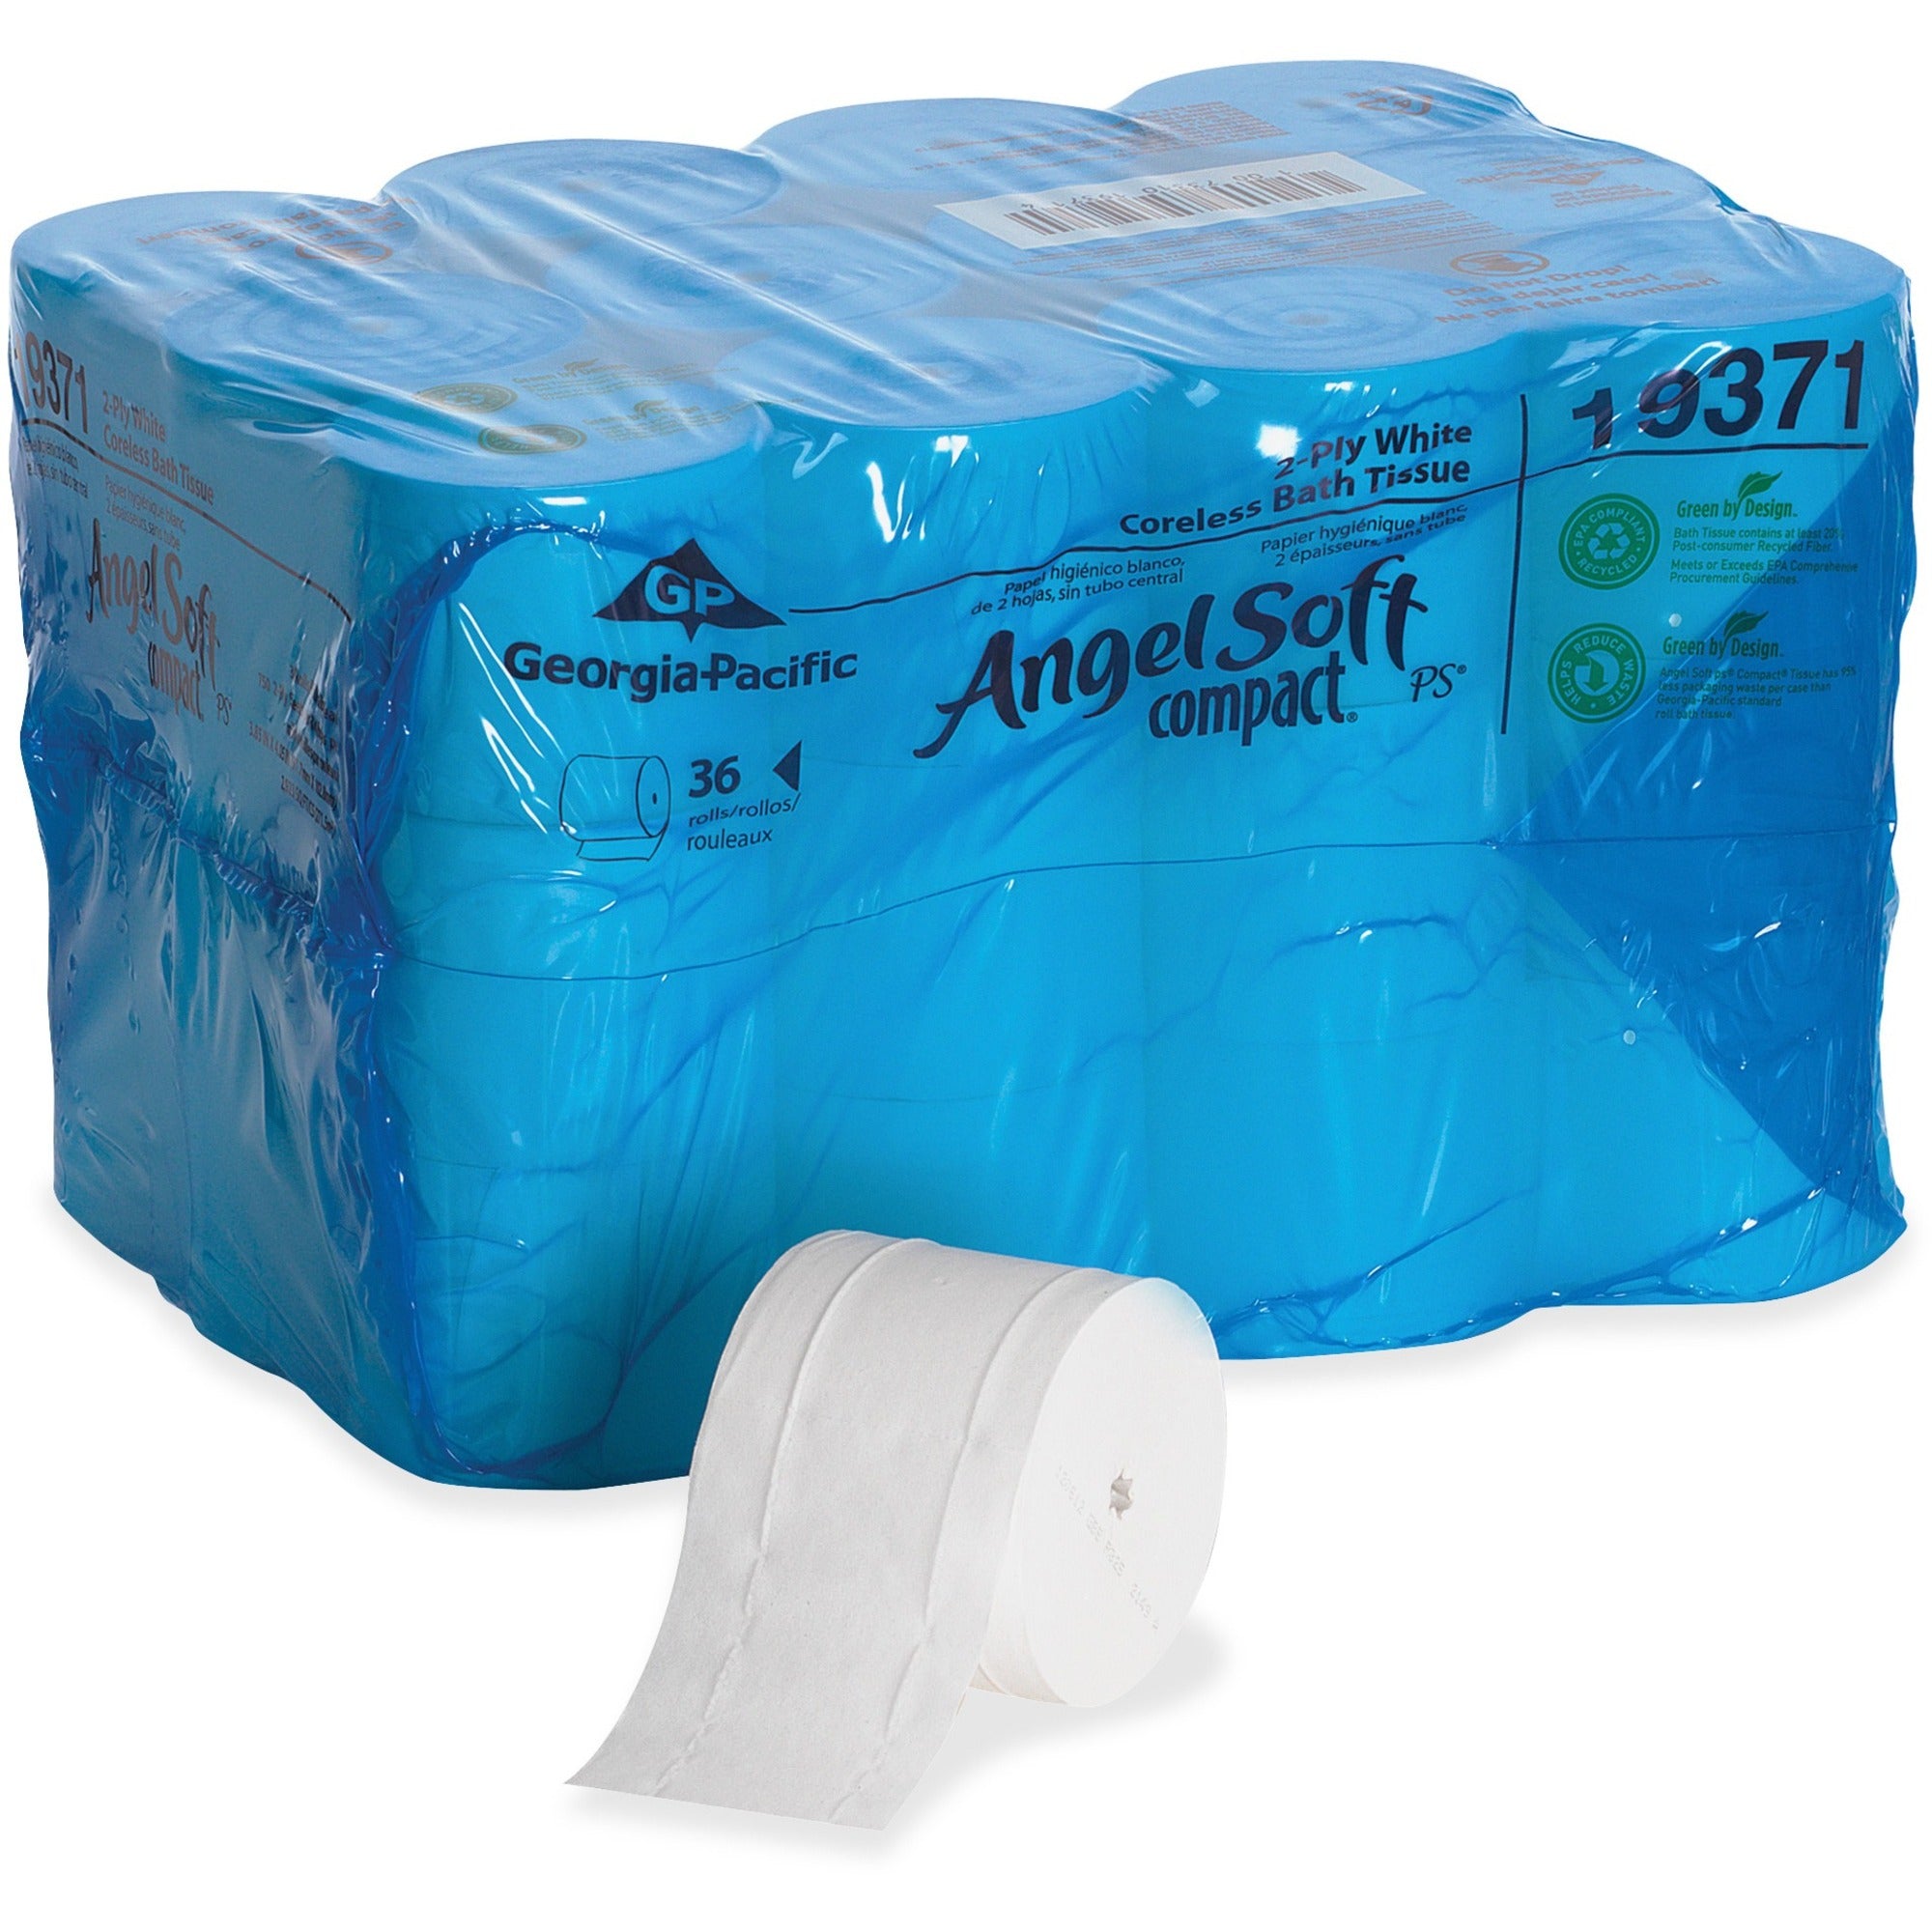 angel-soft-professional-series-compact-premium-embossed-toilet-paper-2-ply-385-x-405-750-sheets-roll-475-roll-diameter-050-core-white-coreless-embossed-soft-for-bathroom-36-rolls-per-carton-36-carton_gpc19371 - 1